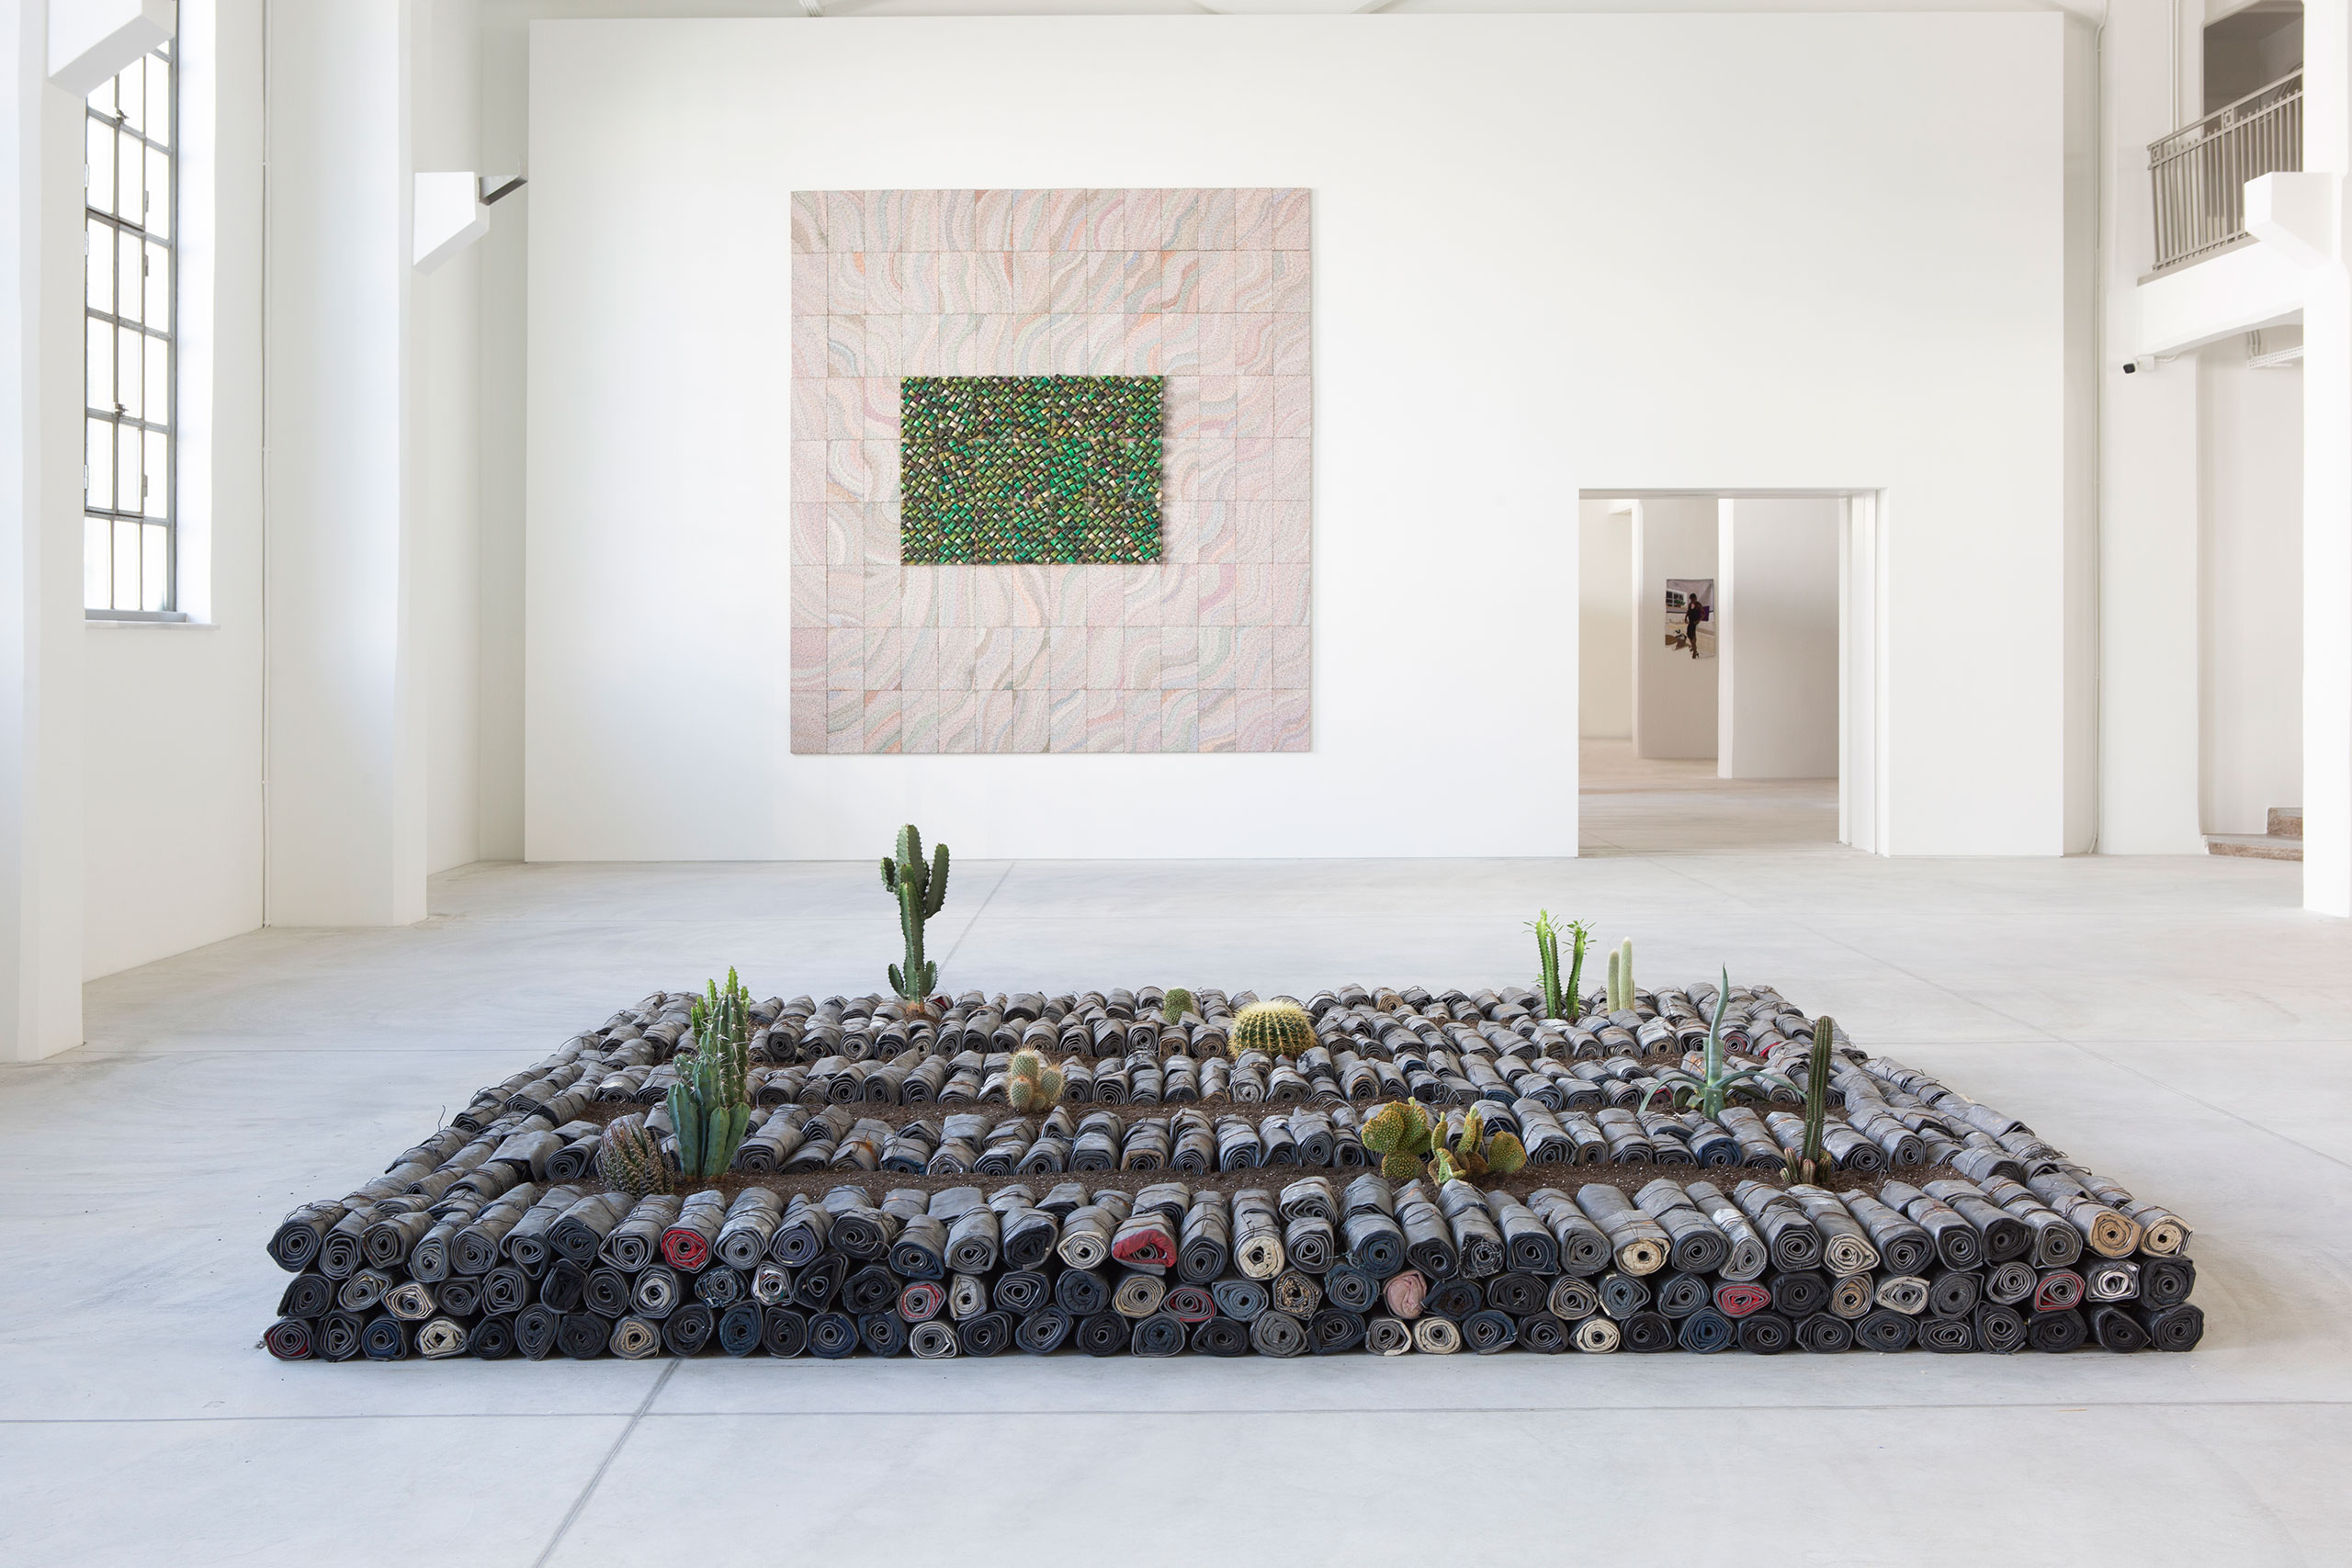 Installation View Portals, Hellenic Parliament + NEON at the former Public Tobacco Factory, Photography © Natalia Tsoukala. Courtesy NEON
Featured (front to back):
Jannis Kounellis, Untitled, 2005. Lead, clothes, earth, cacti. 85 × 360 × 360 cm. Private Collection Rome, Italy.
Elias Sime, TIGHTROPE: ECHO!?, 2020. Reclaimed electrical wire and components. 365.8 × 320 × 3.2 cm. Courtesy the artist and James Cohan, New York.